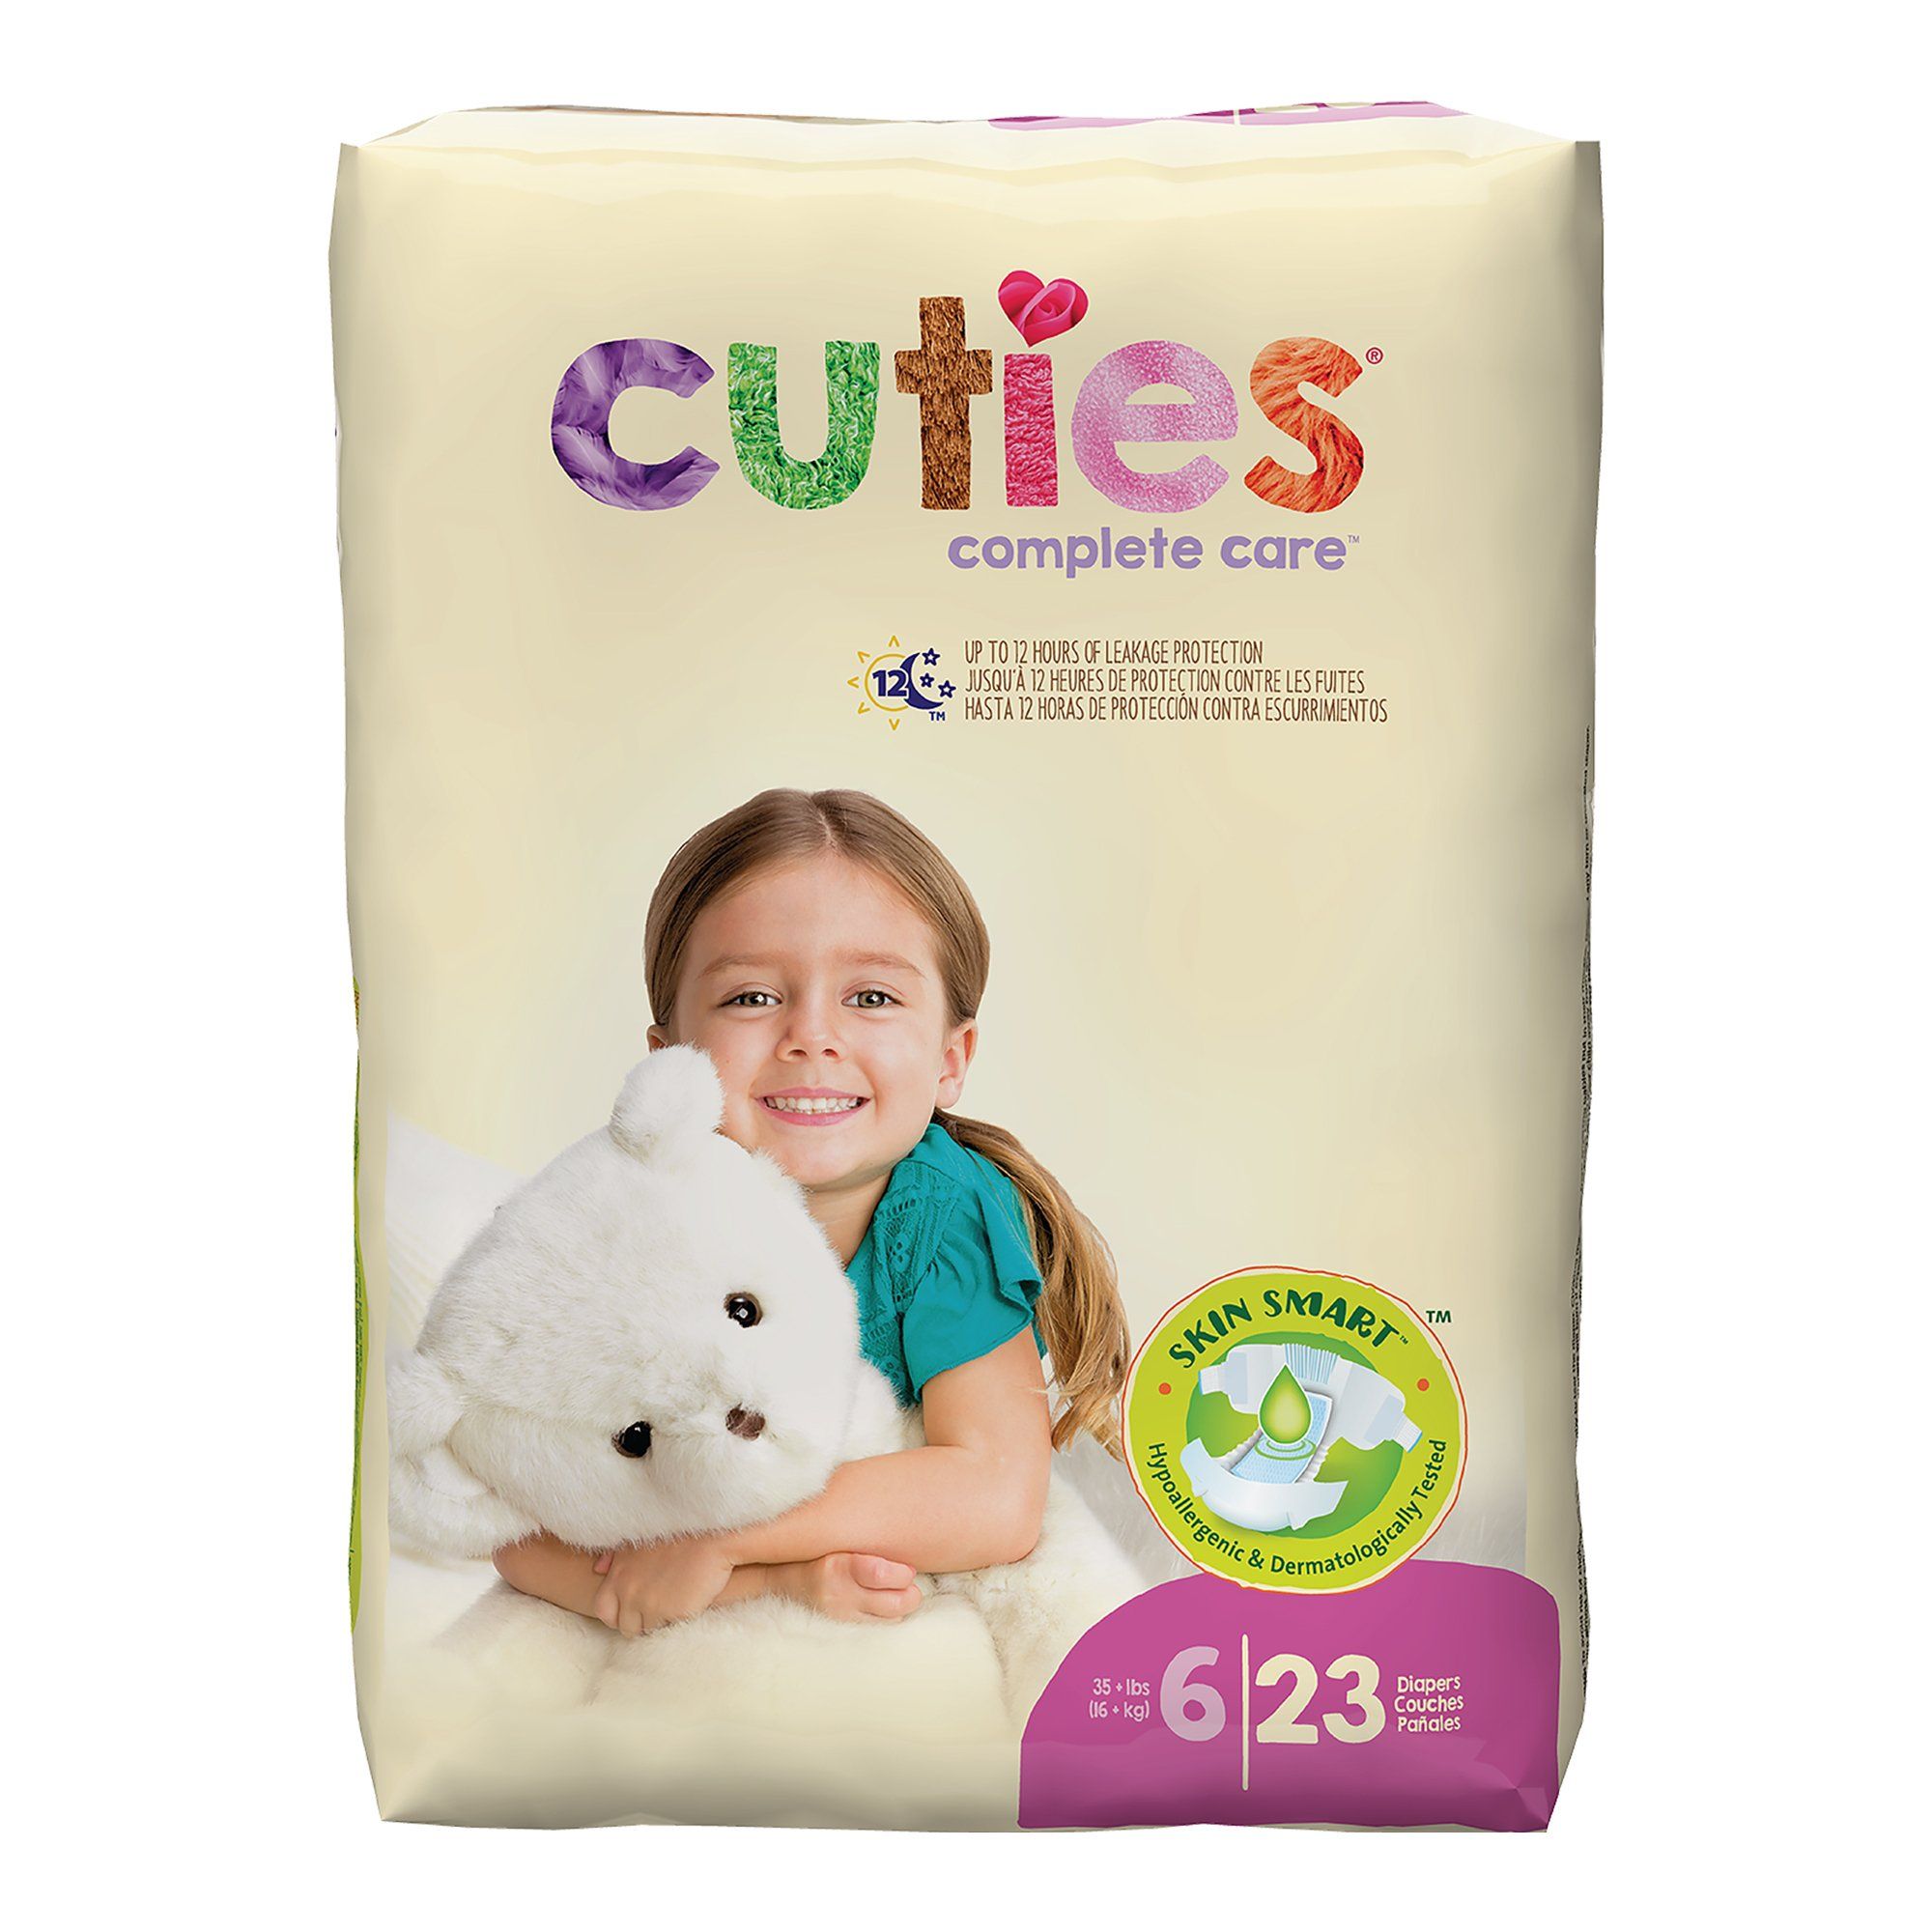 Cuties Complete Care Baby Diapers, Size 6 - 23 ct